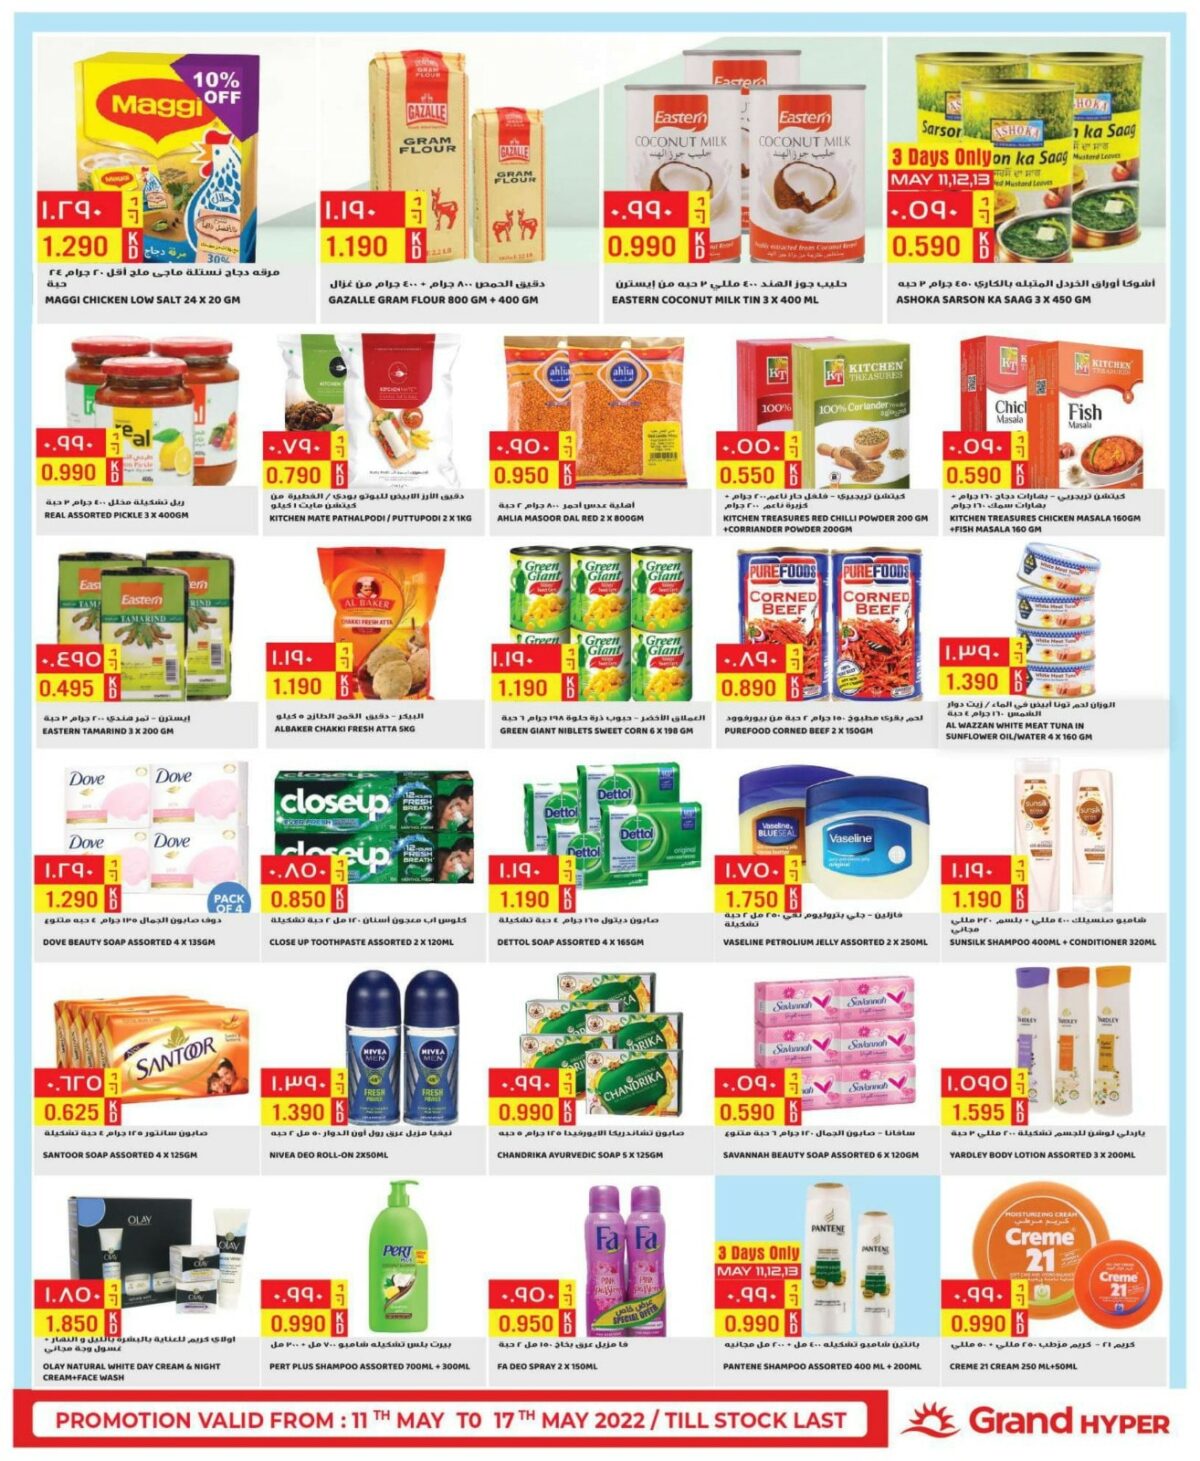 Grand Hypermarket Special Offers, iiQ8 weekly promotions 5